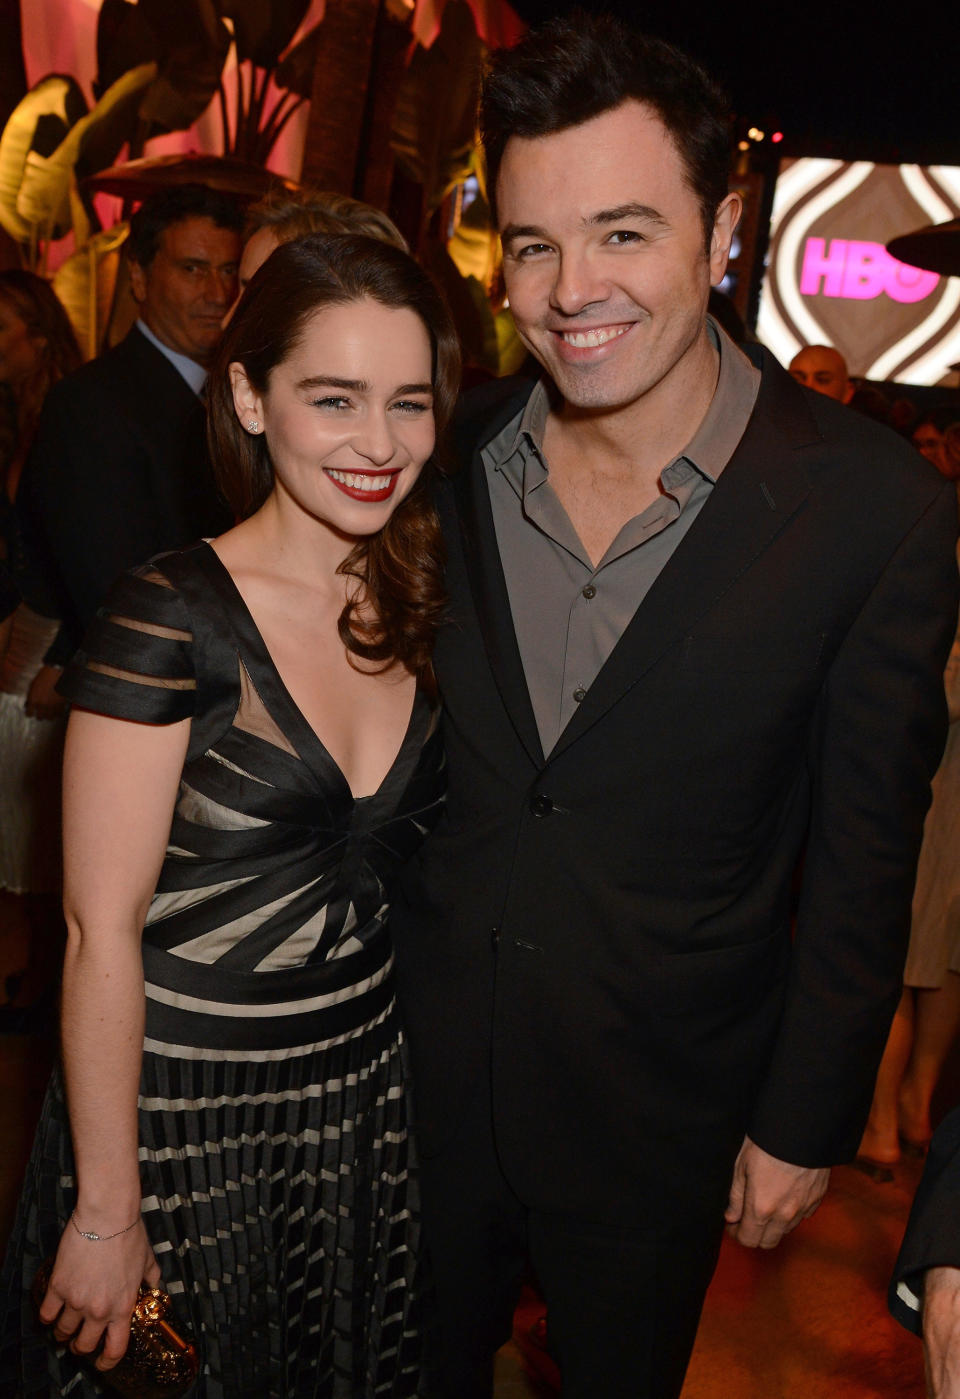 Seth MacFarlane and Emilia Clarke posing together at an event, they're both wearing formalwear and smiling